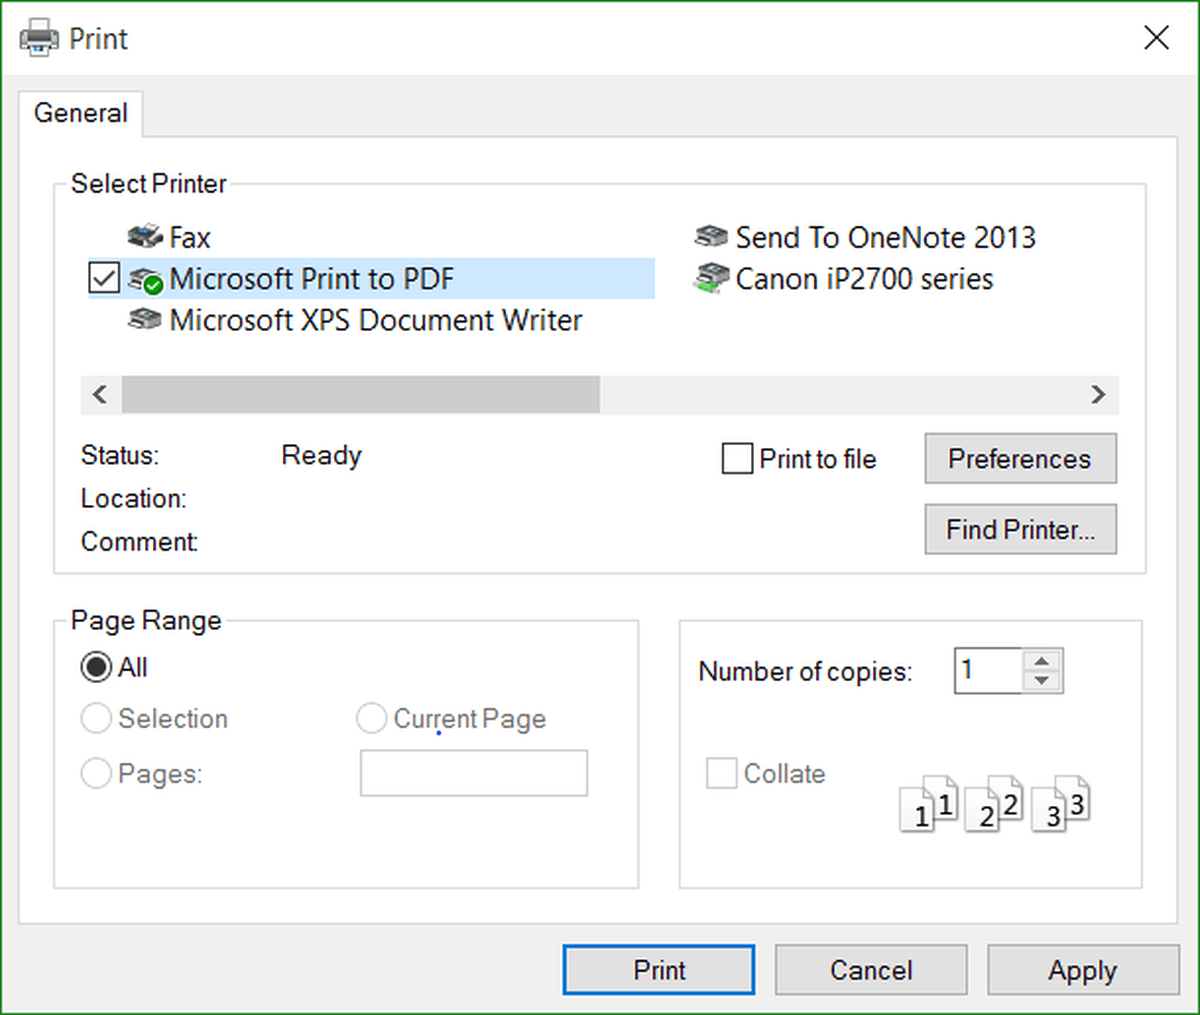 How to fix missing pdfmaker files?